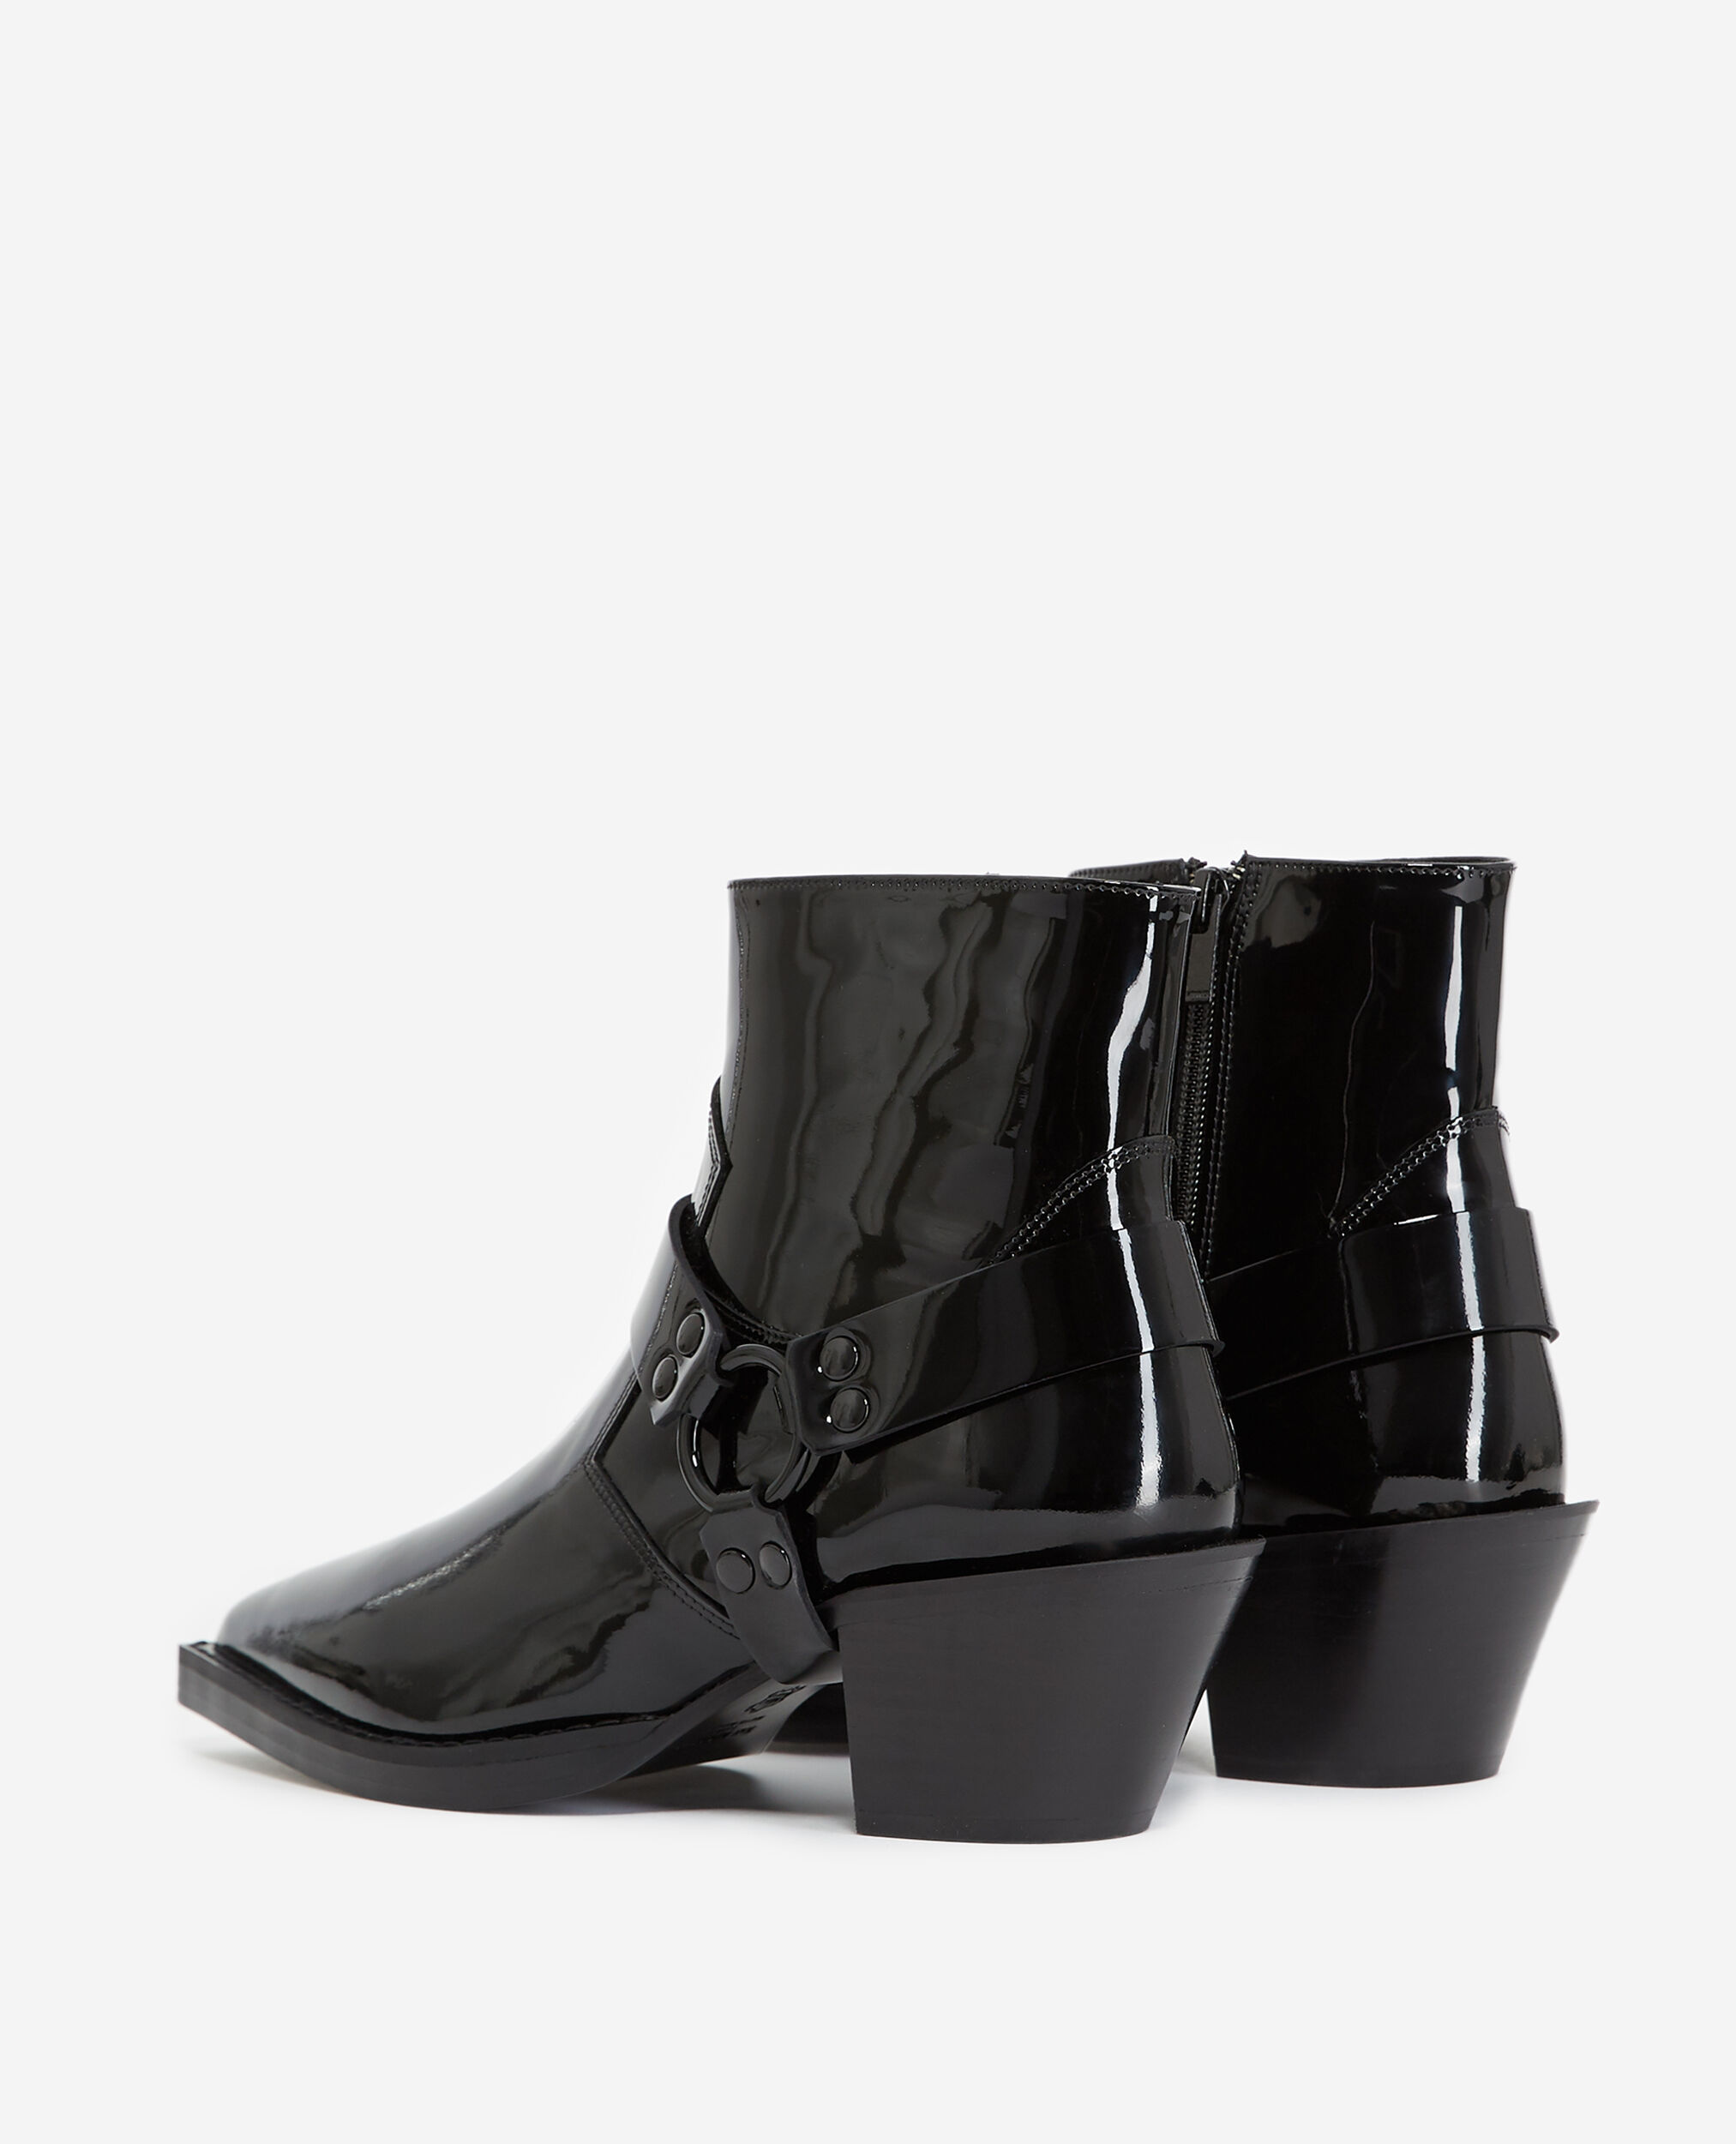 Western patent leather black ankle boots, BLACK, hi-res image number null